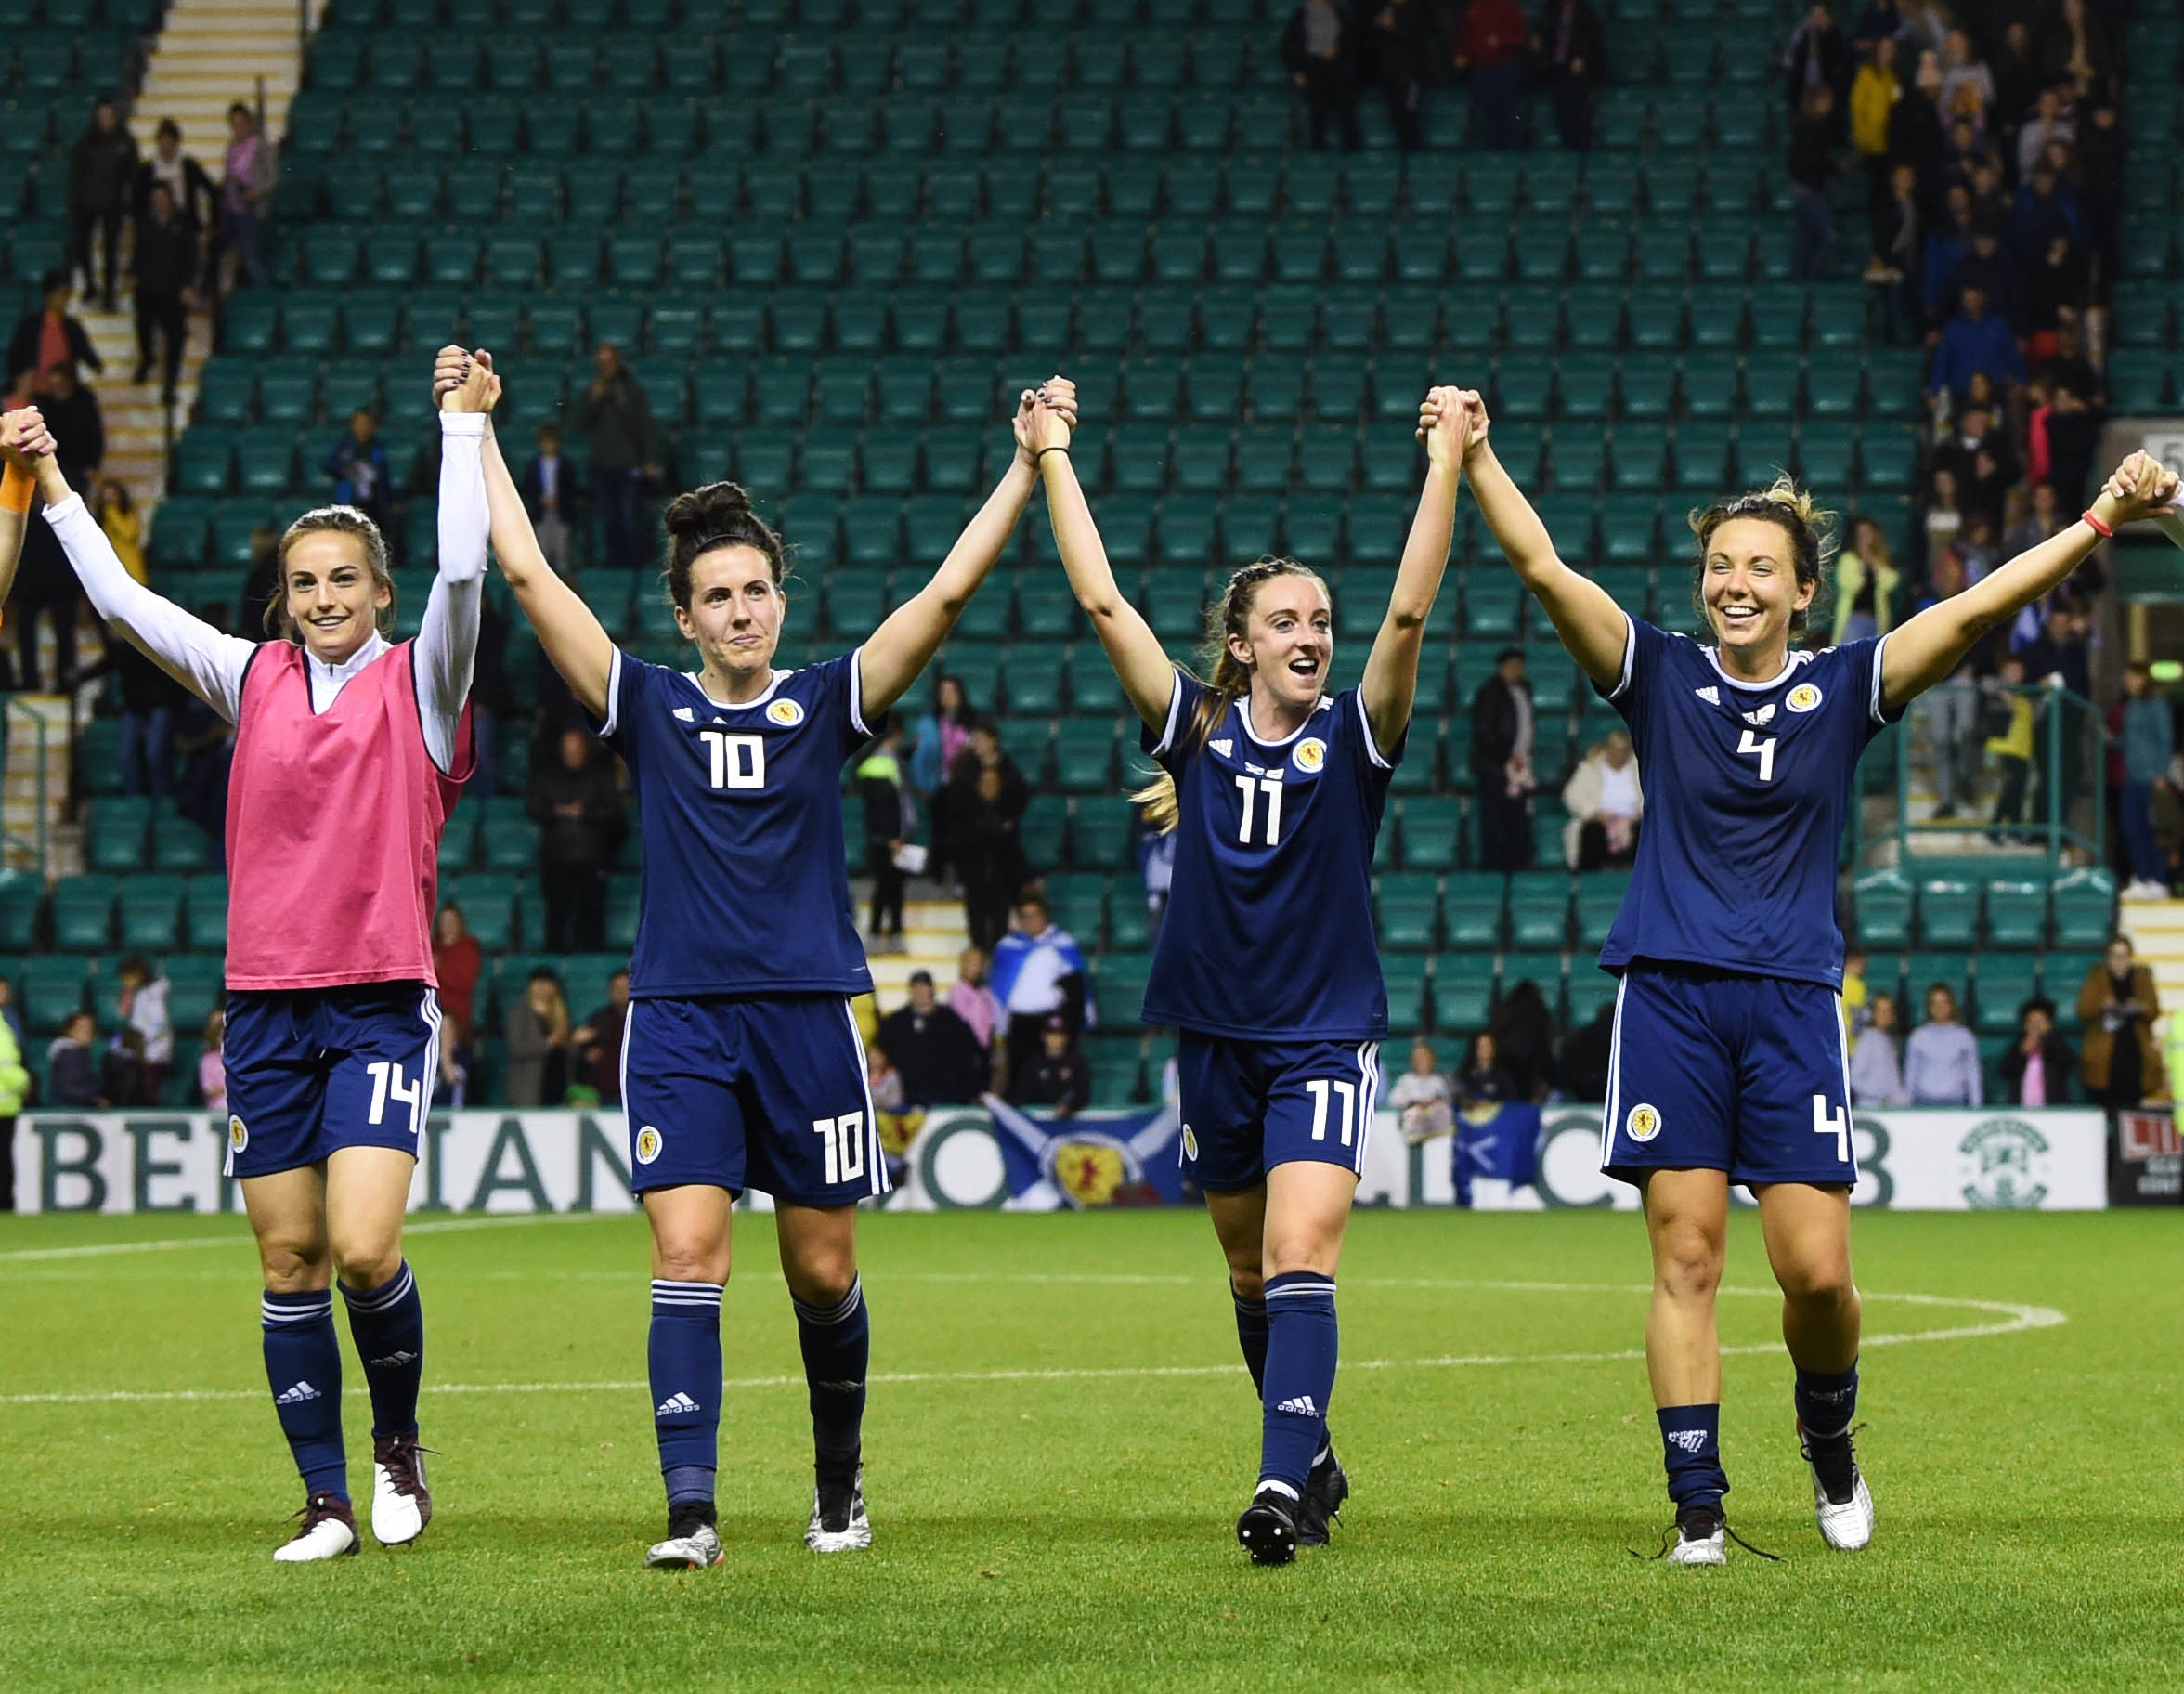 The Scotland players celebrate towards the fans at full time of the UEFA Women’s 2021 qualifier between Scotland and Cyprus